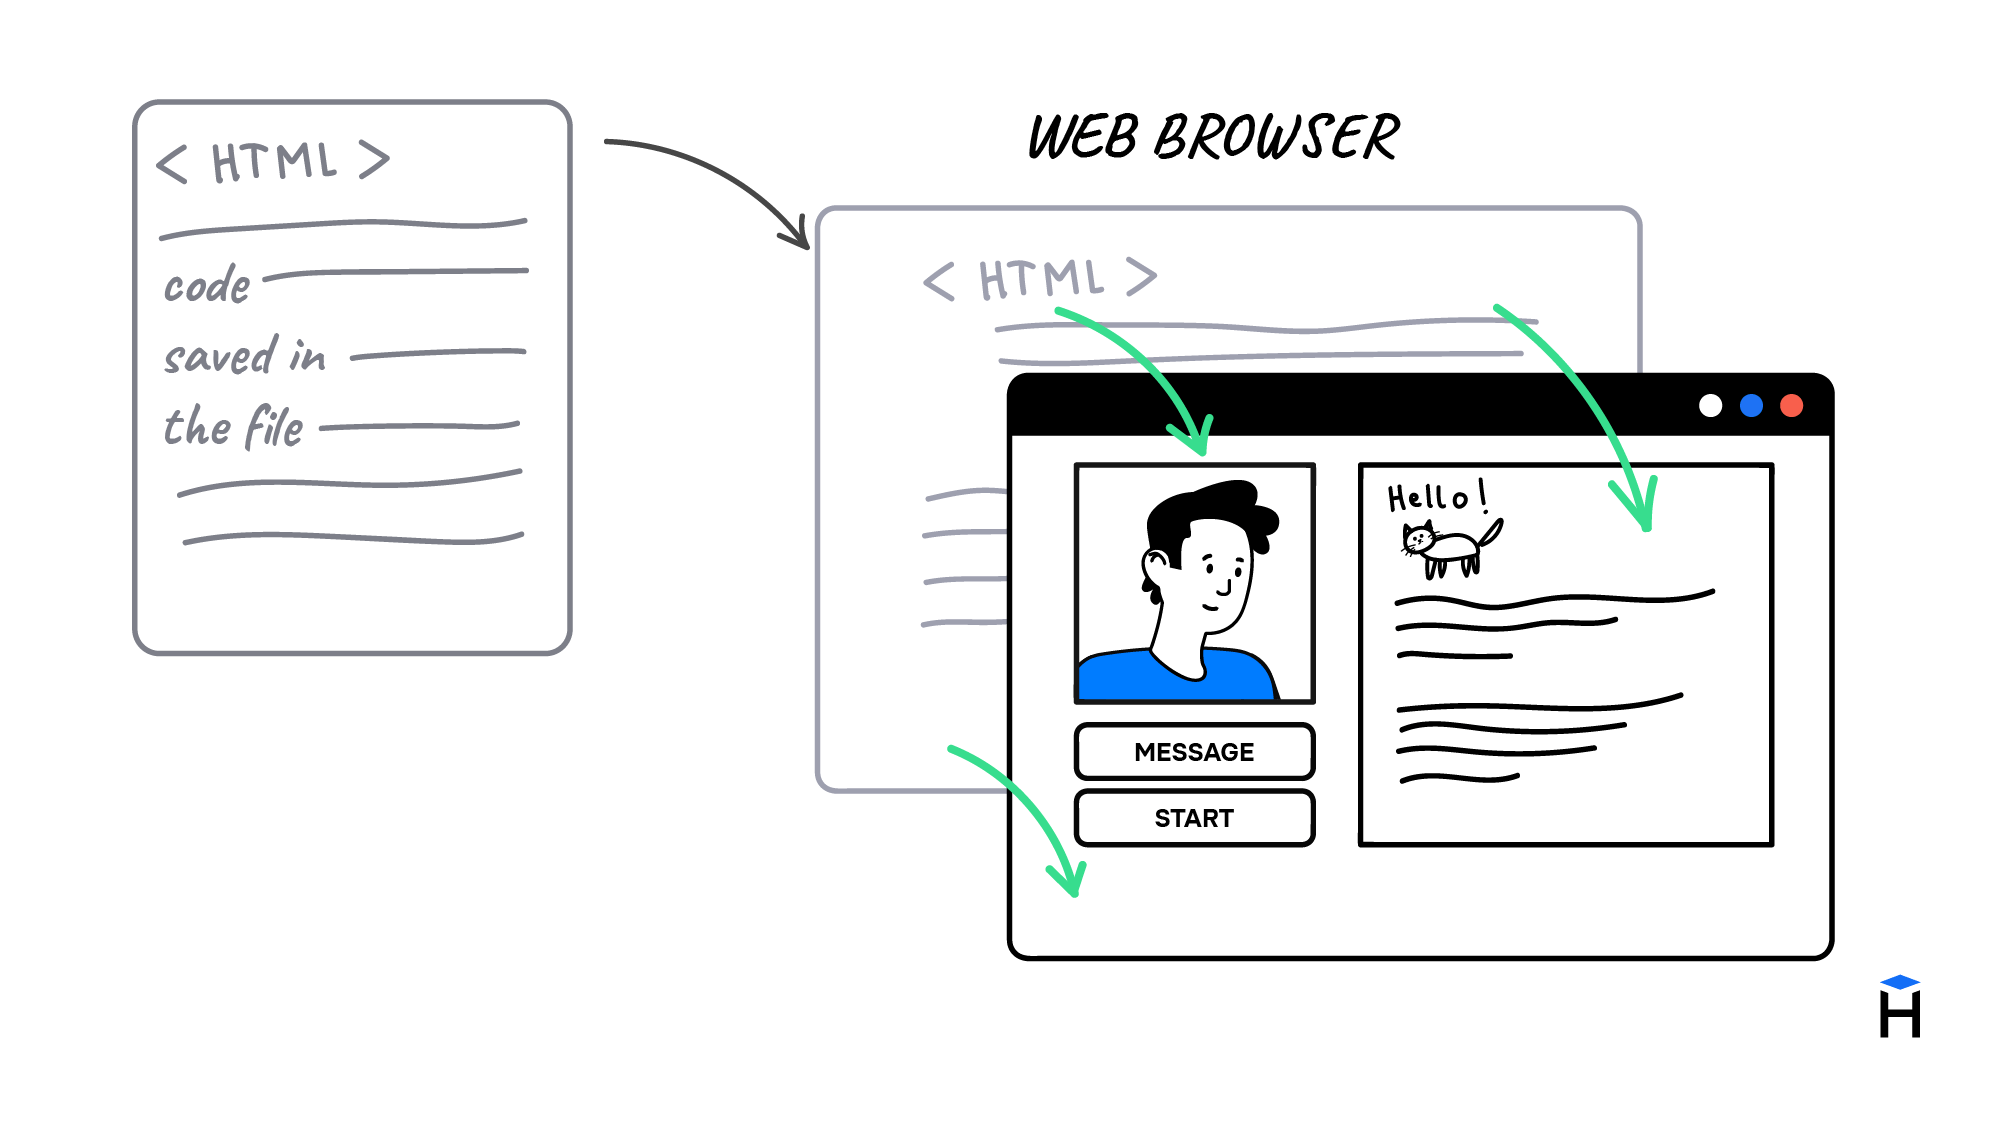 HTML transformation in browser